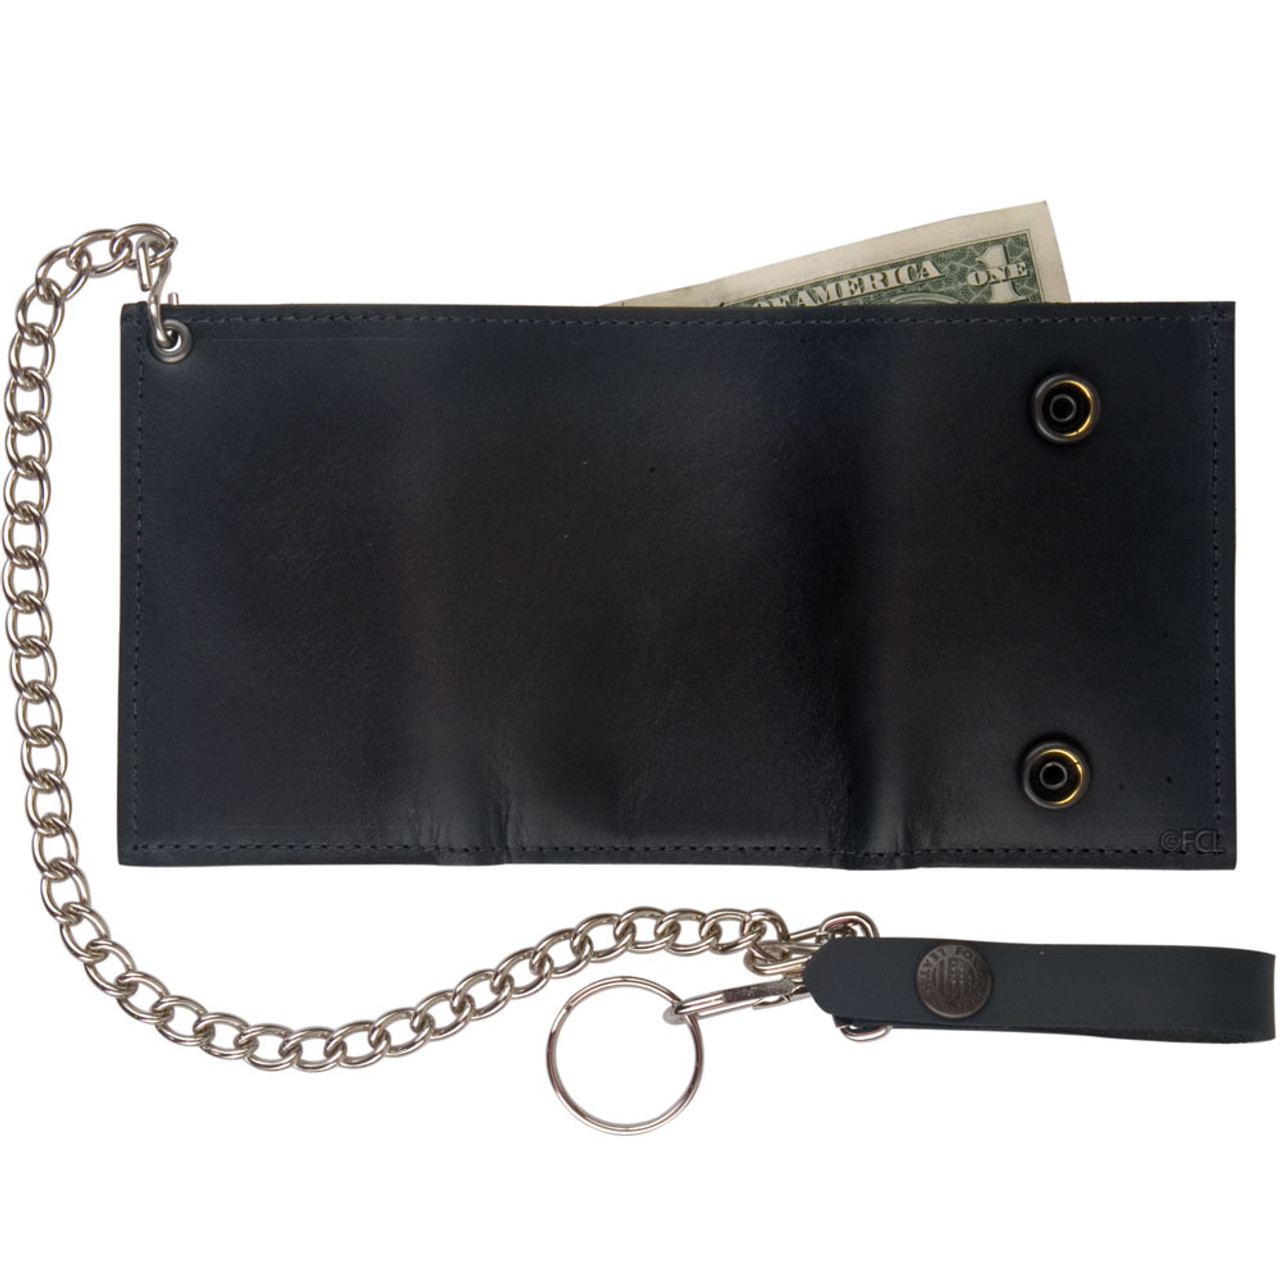 Wallet Chains: Why They Should Come Back